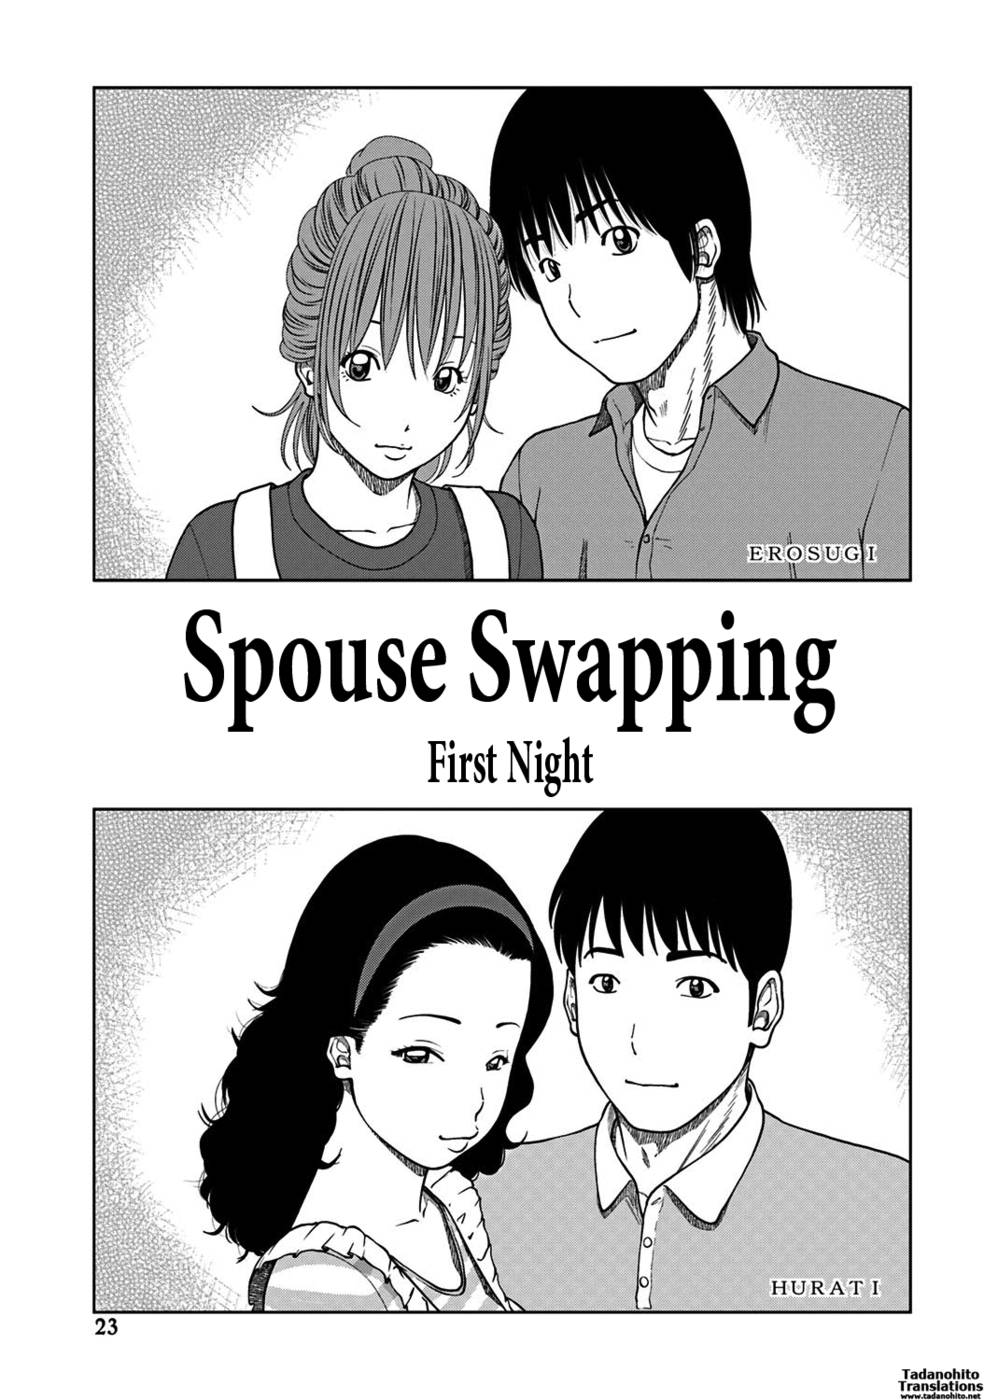 33 Year Old Unsatisfied Wife-Chapter 2-Spouse Swapping-First Night-Hentai Manga Hentai Comic